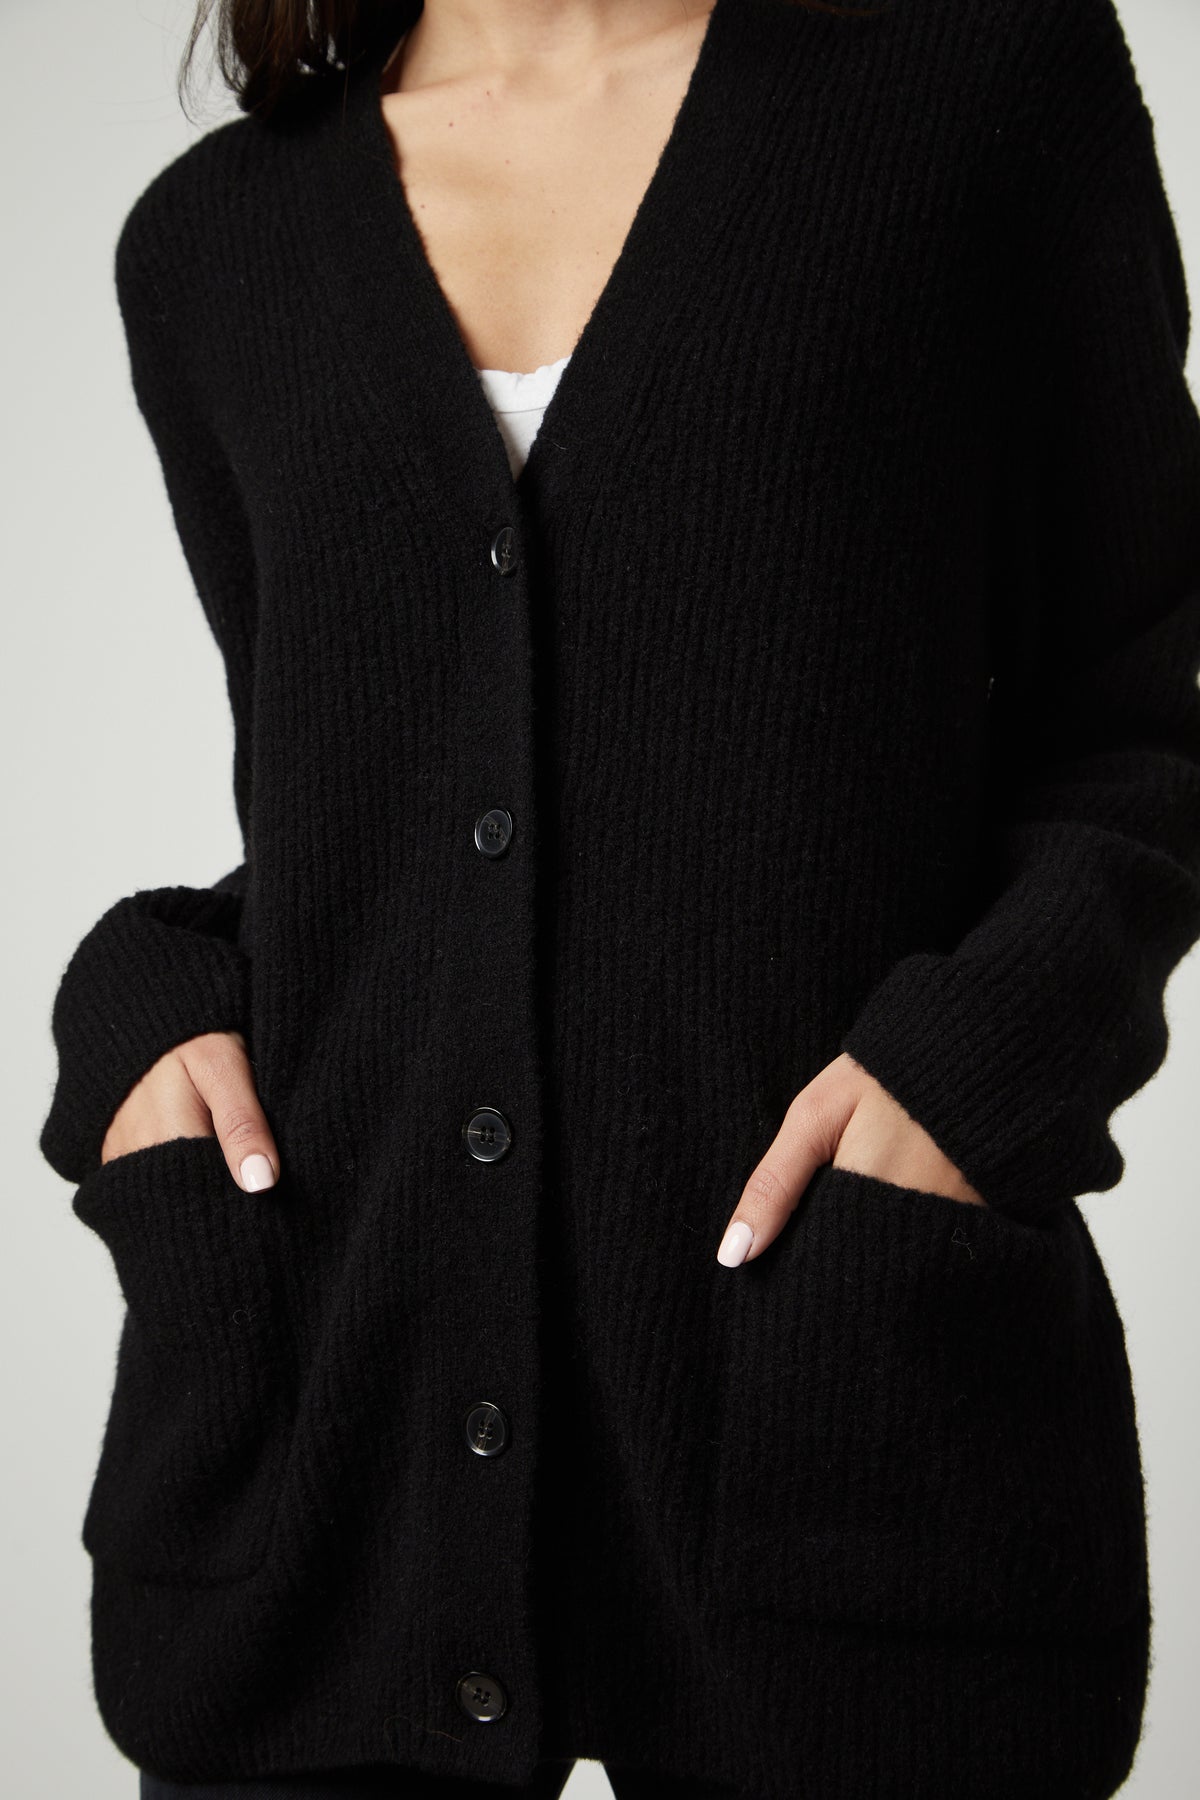 A person wearing Velvet by Graham & Spencer's BRITT OVERSIZED CARDIGAN with pockets.-26897709531329